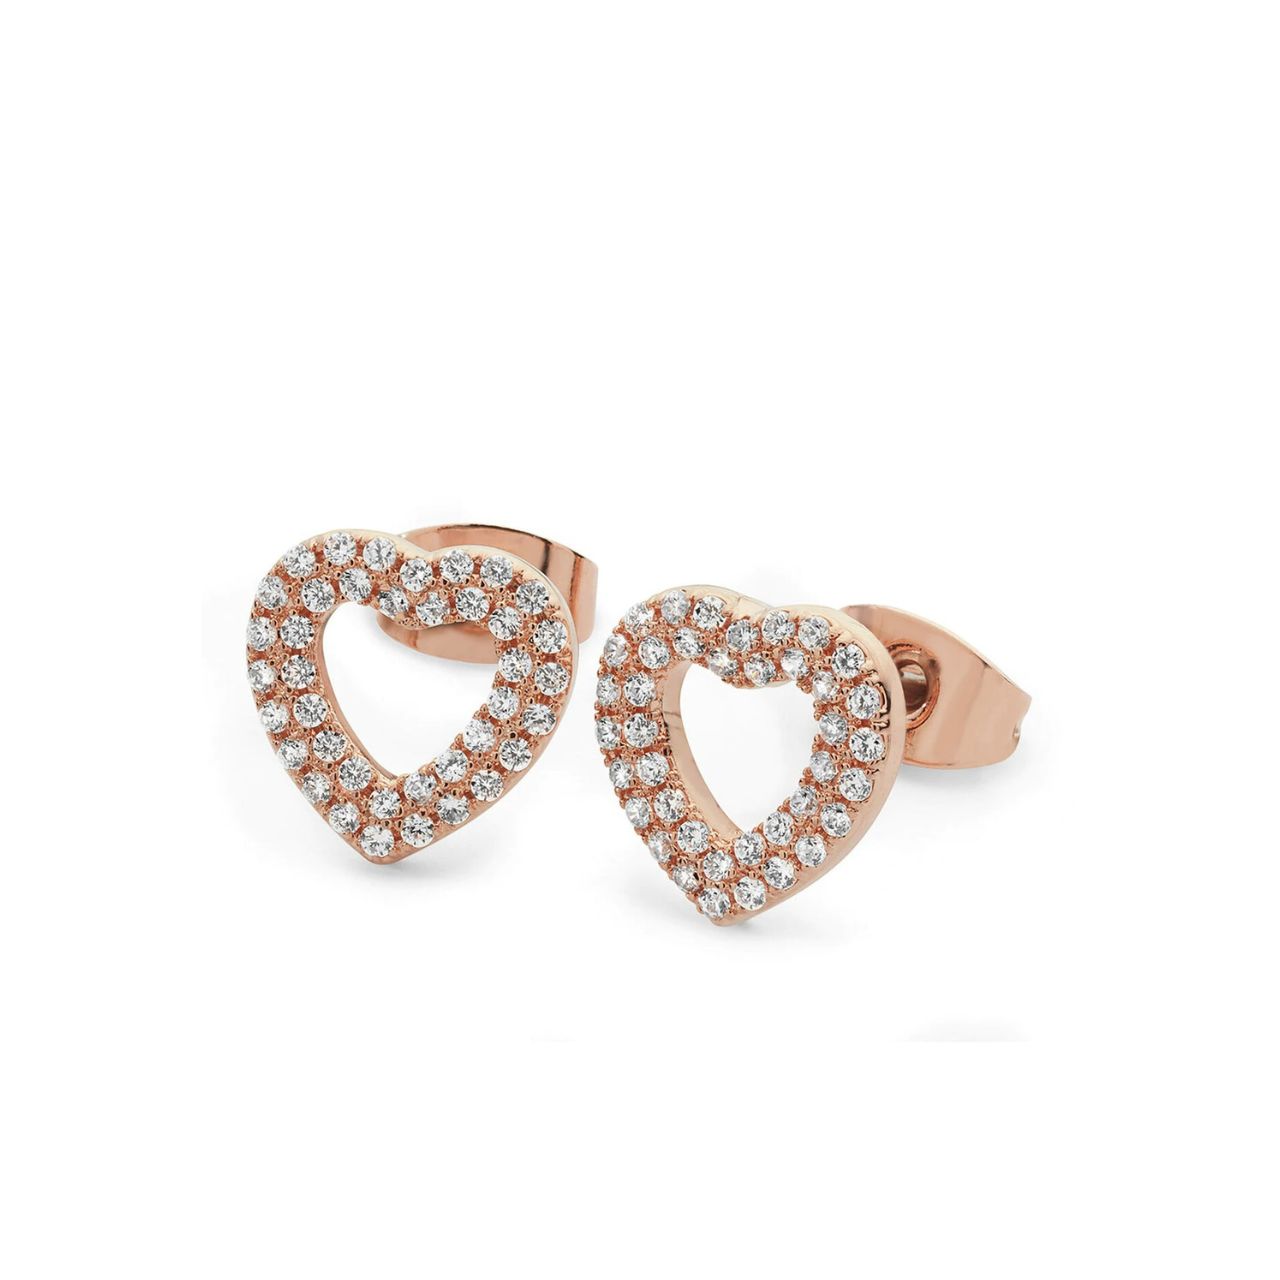 Double Pave Heart Earrings Rose Gold by Tipperary  Simple yet elegantly dazzling these clear stone open heart shaped stud earrings are the perfect partner to our double pavé pendant.